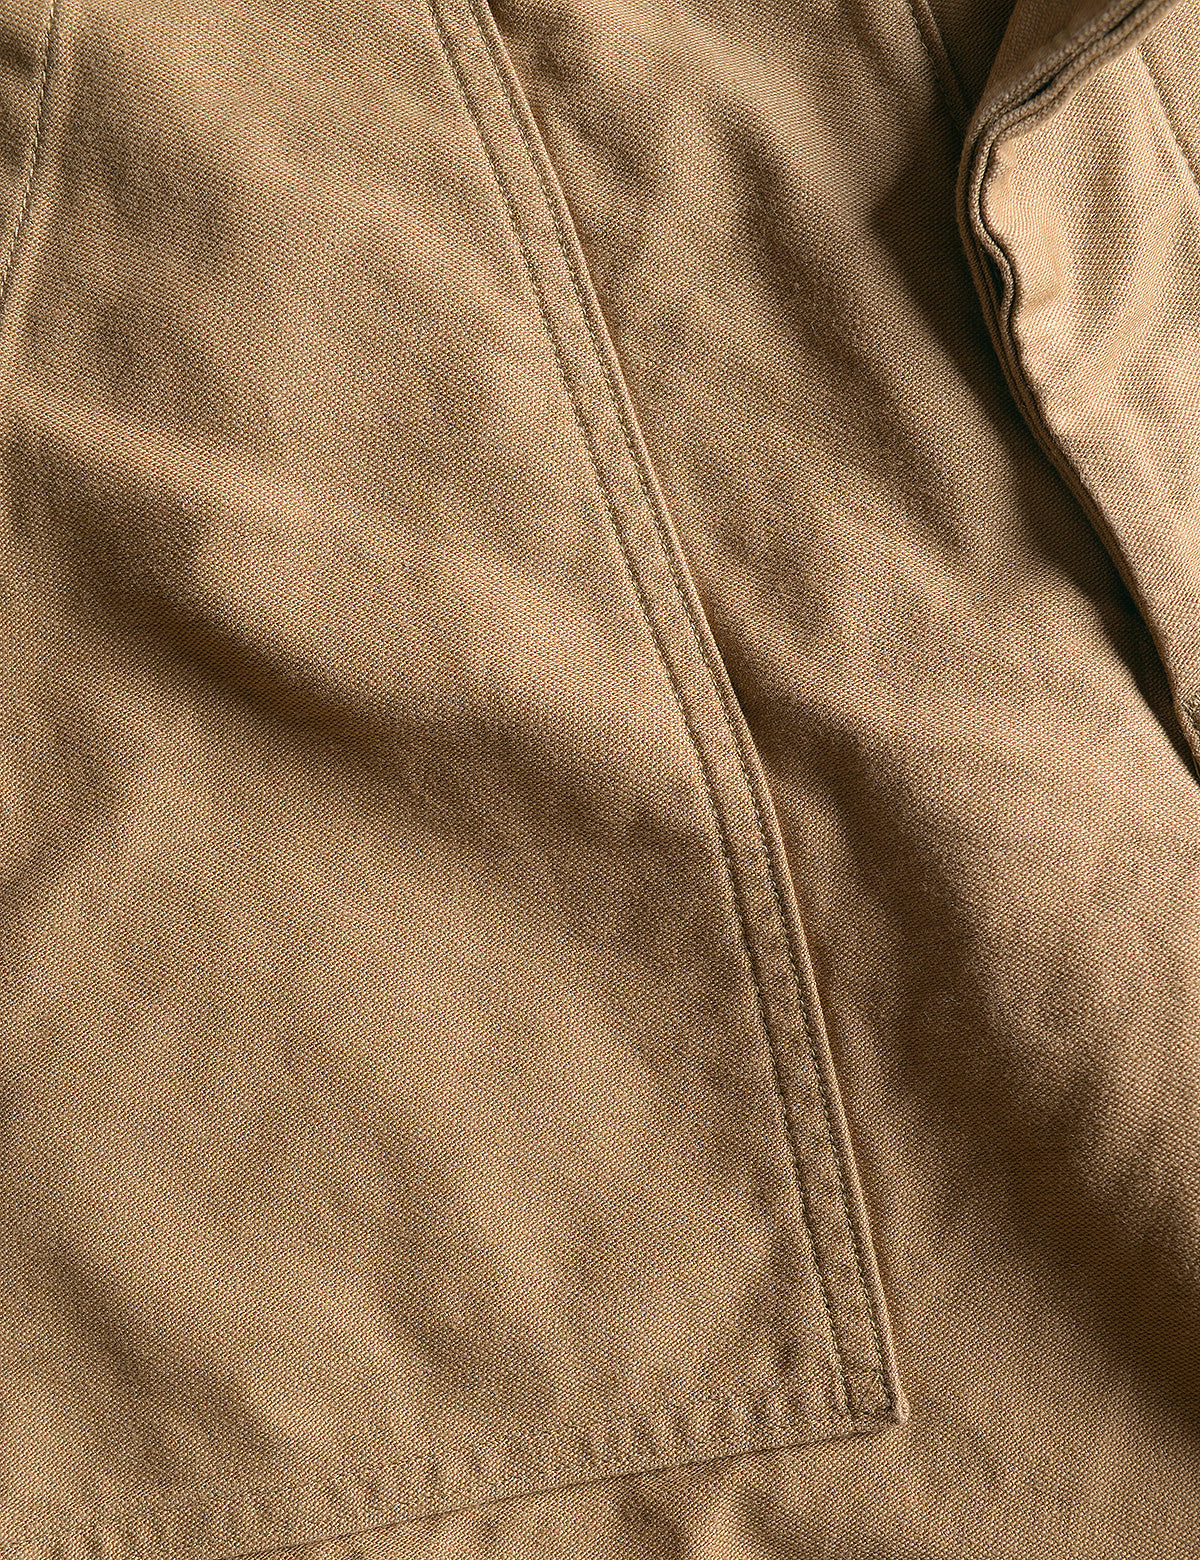 Seam detail of Orslow US Army Fatigue Trousers - Khaki